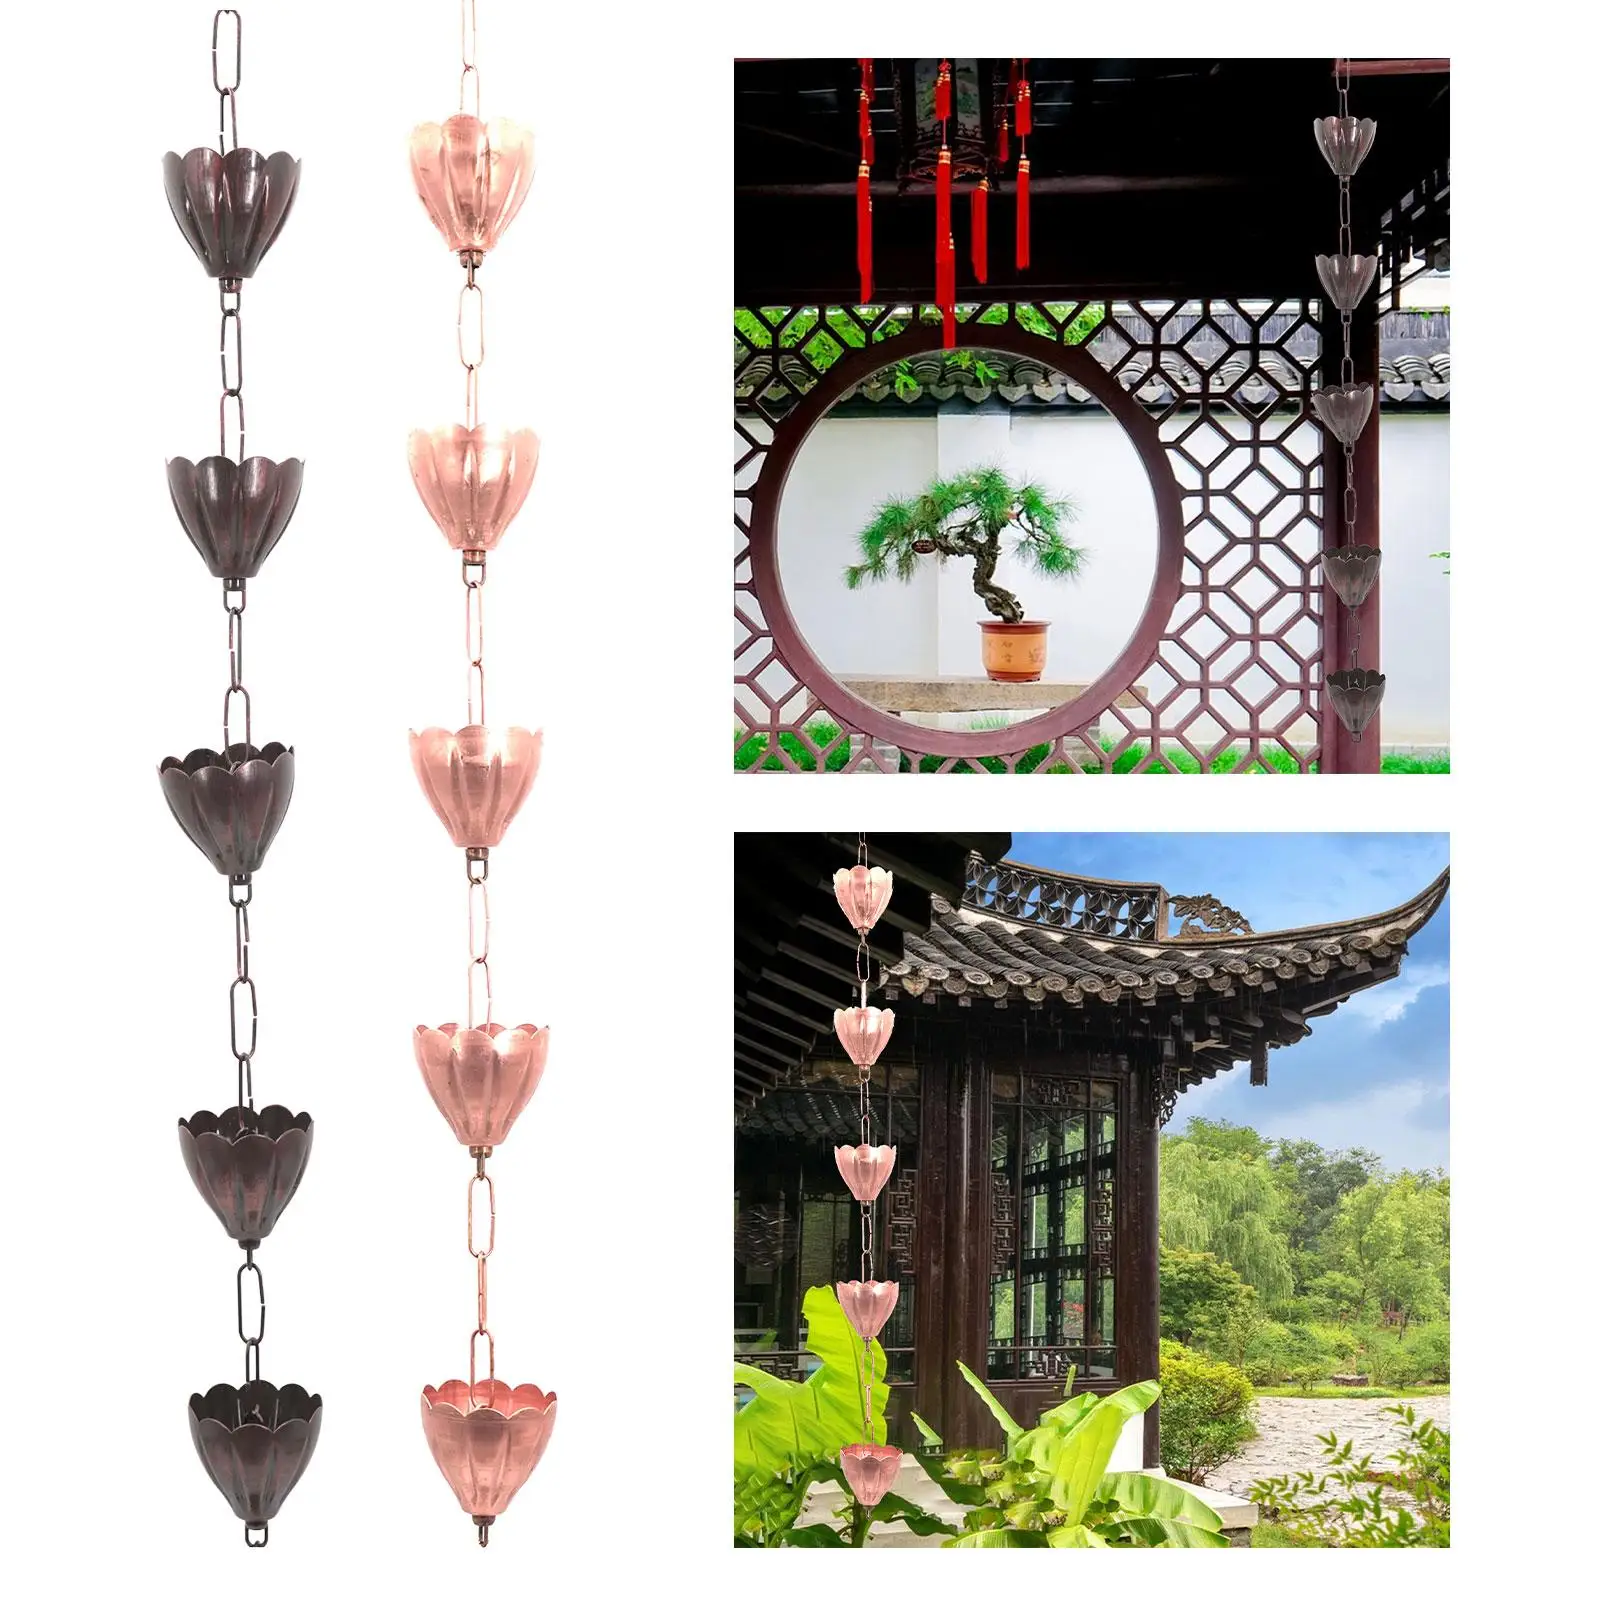 Rain Chains Display Functional for Gutters with Adapter Adjustable Outside for Sheds Garden Awnings Roofs Gazebos